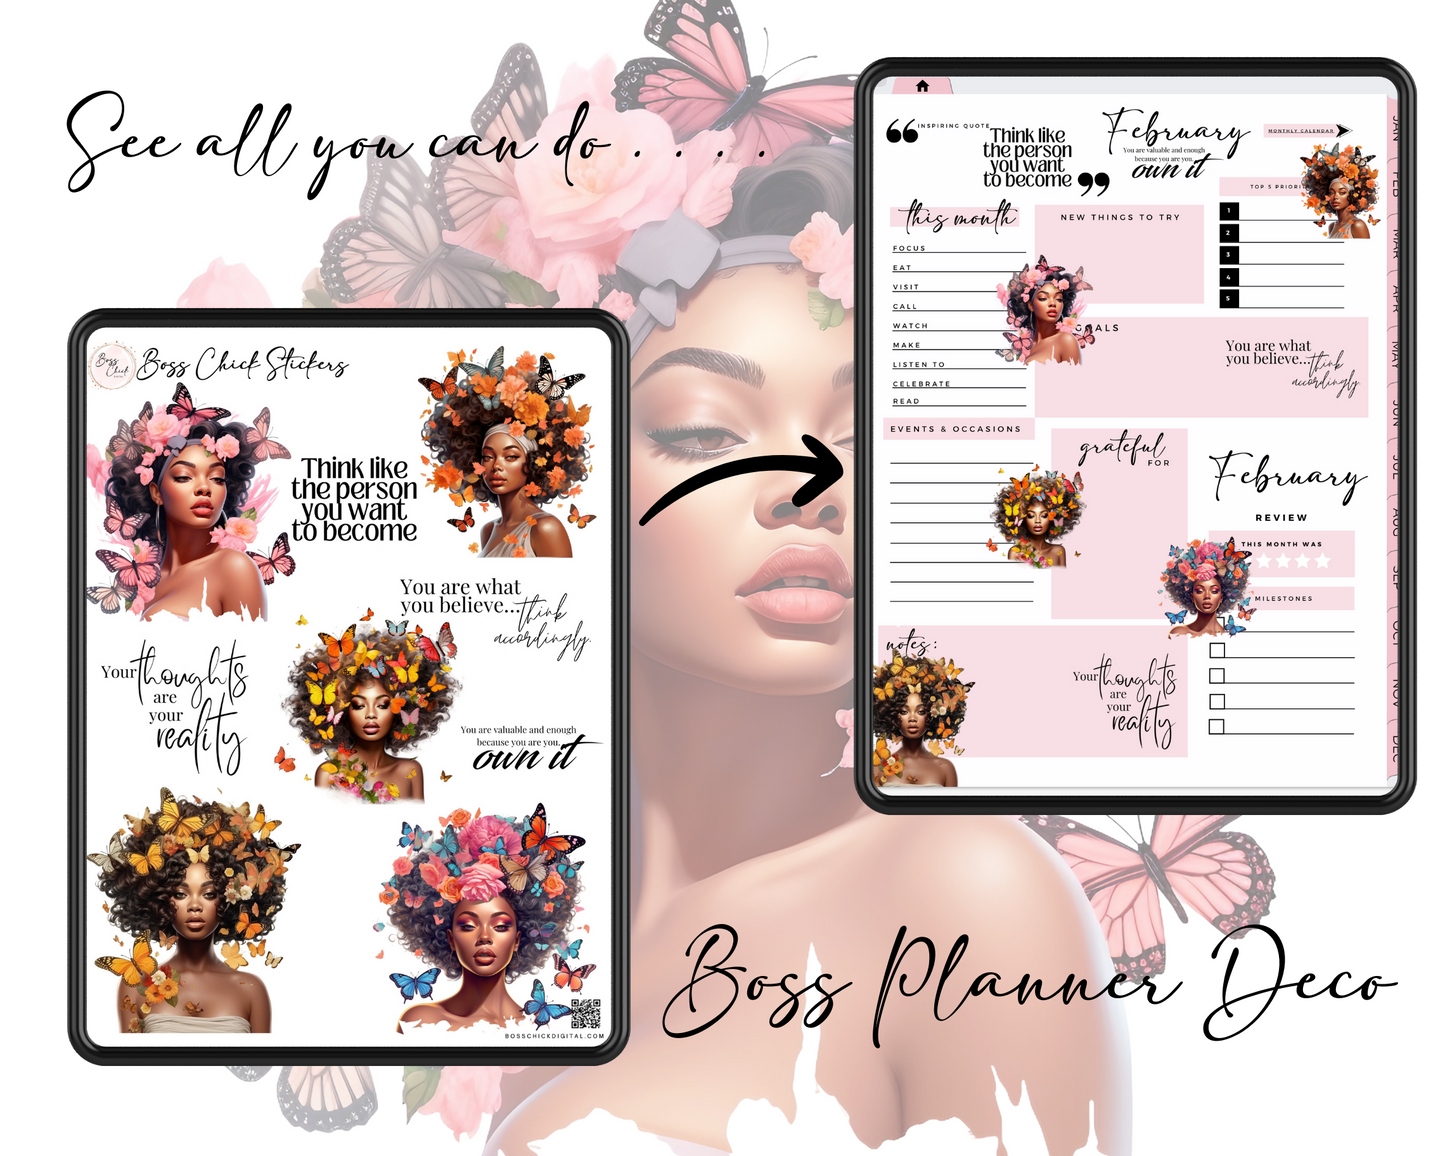 Digital Stickers, Goodnotes stickers, Digital Planner Stickers African American Girl Boss Lady Digital Stickers for Digital Planner